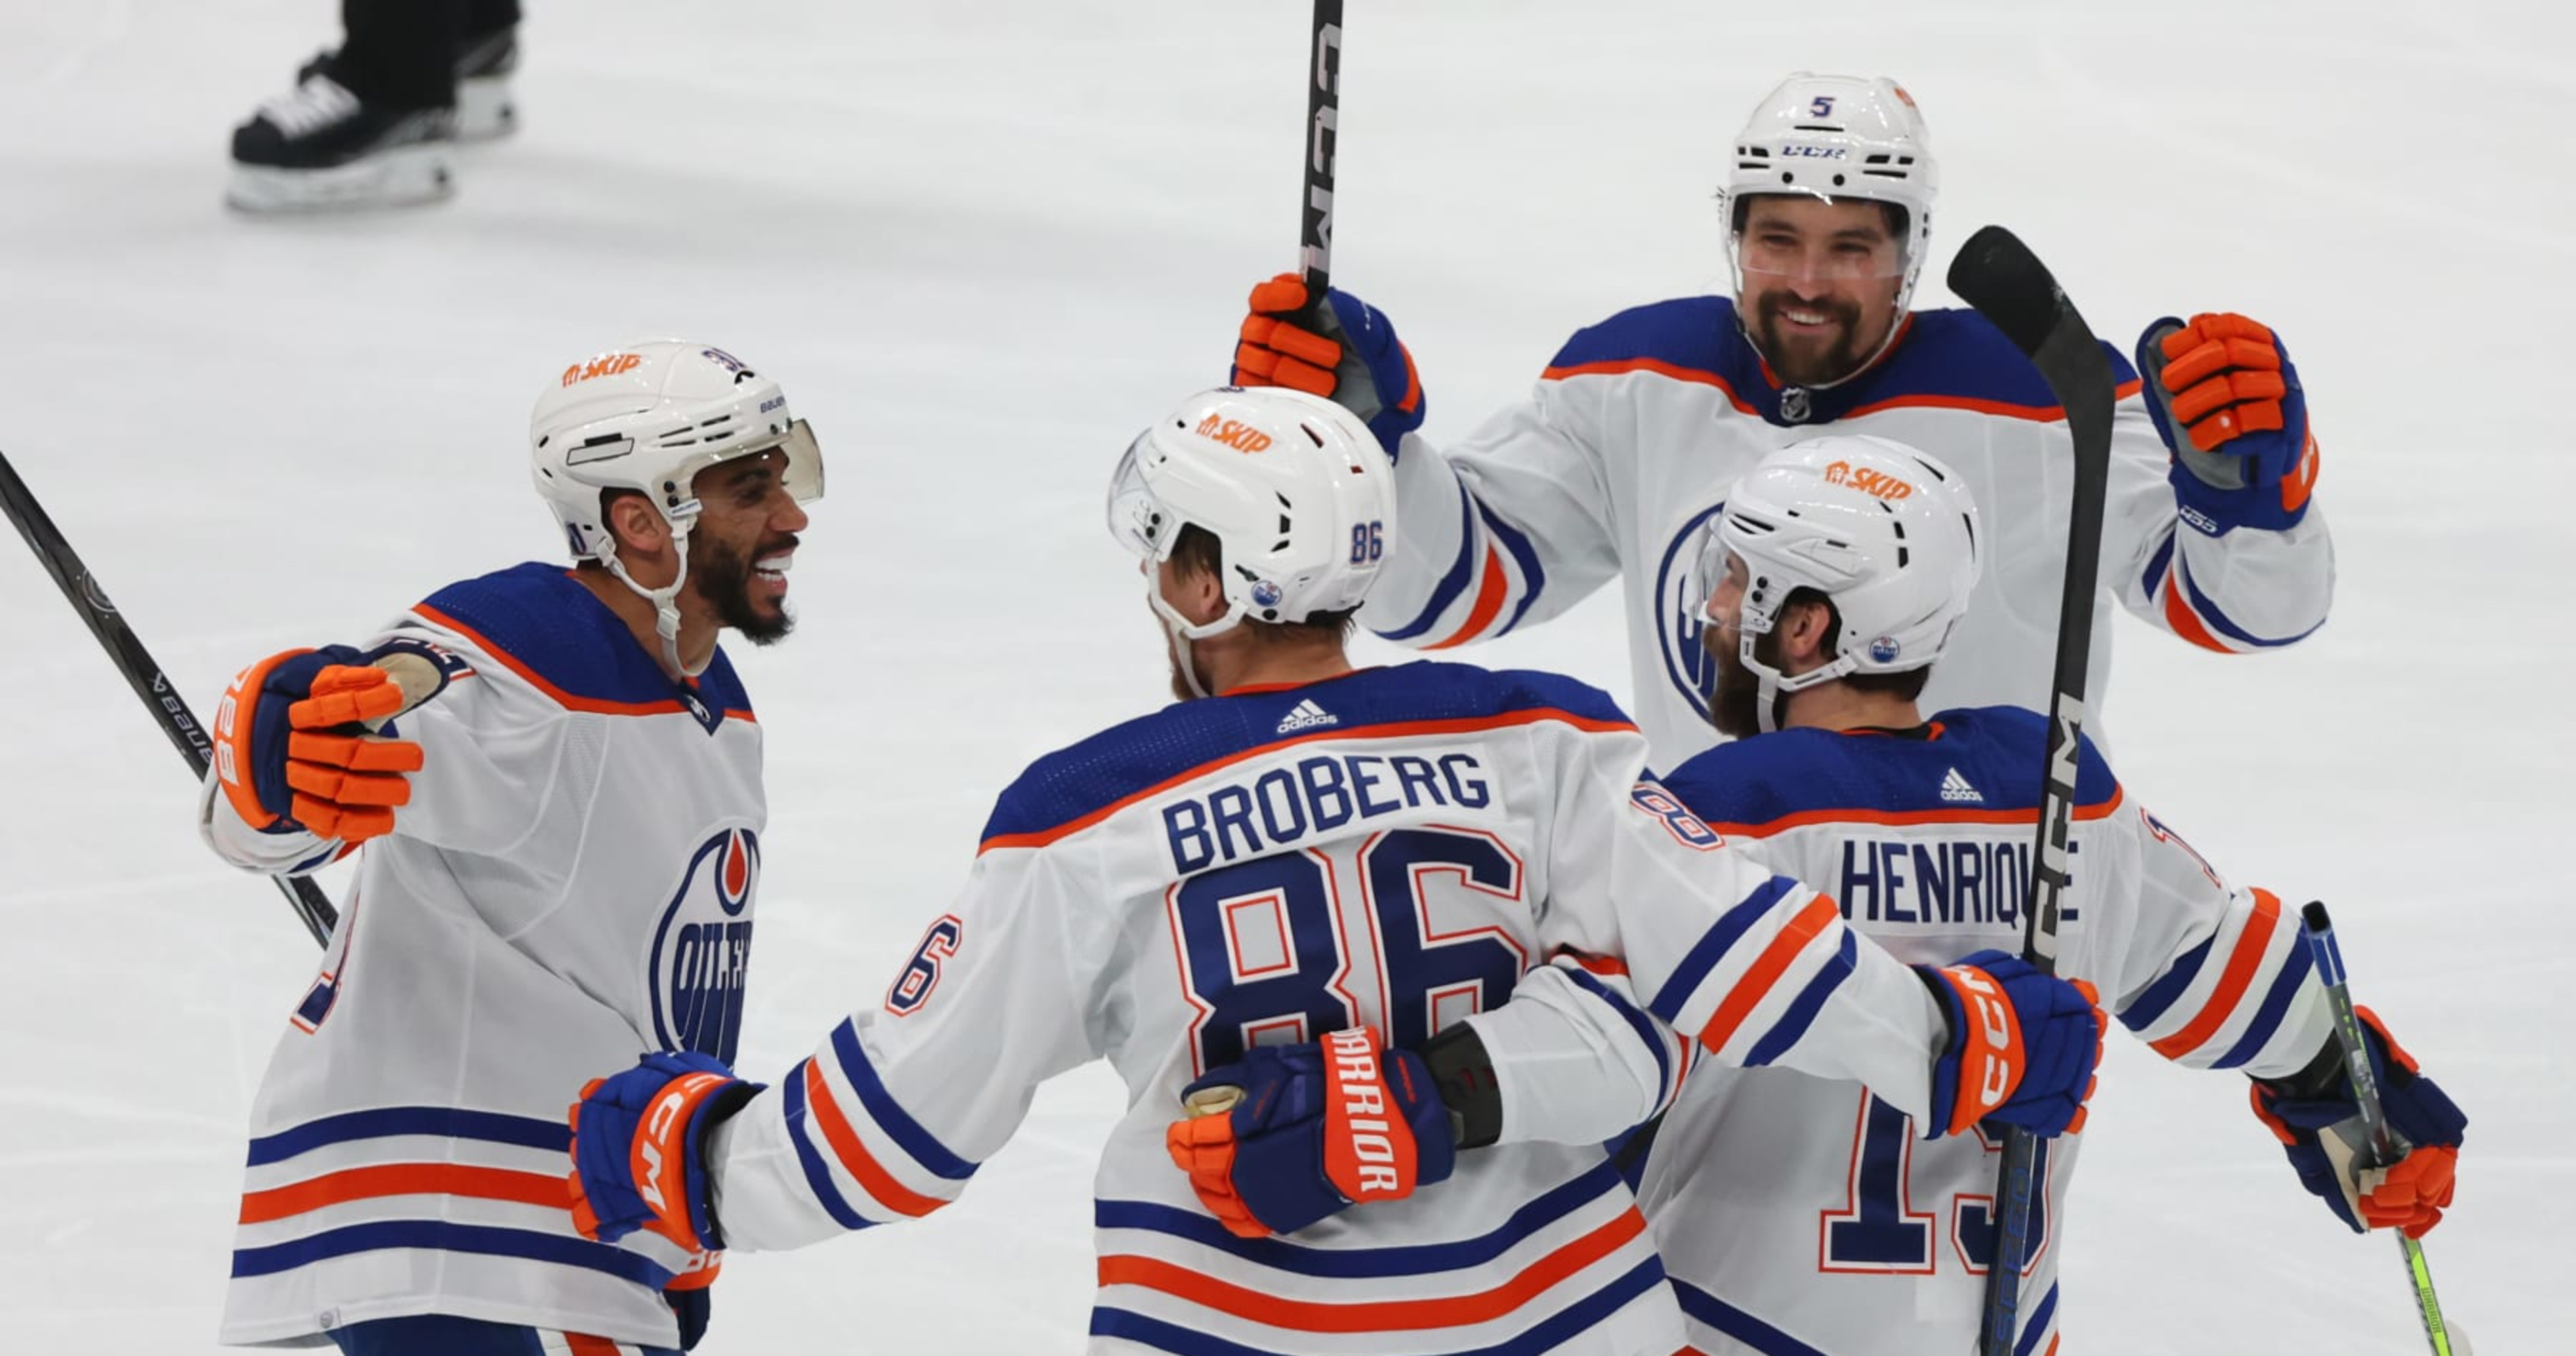 Connor McDavid, Oilers Celebrated By NHL Fans for Taking WCF Series Lead vs. Stars thumbnail